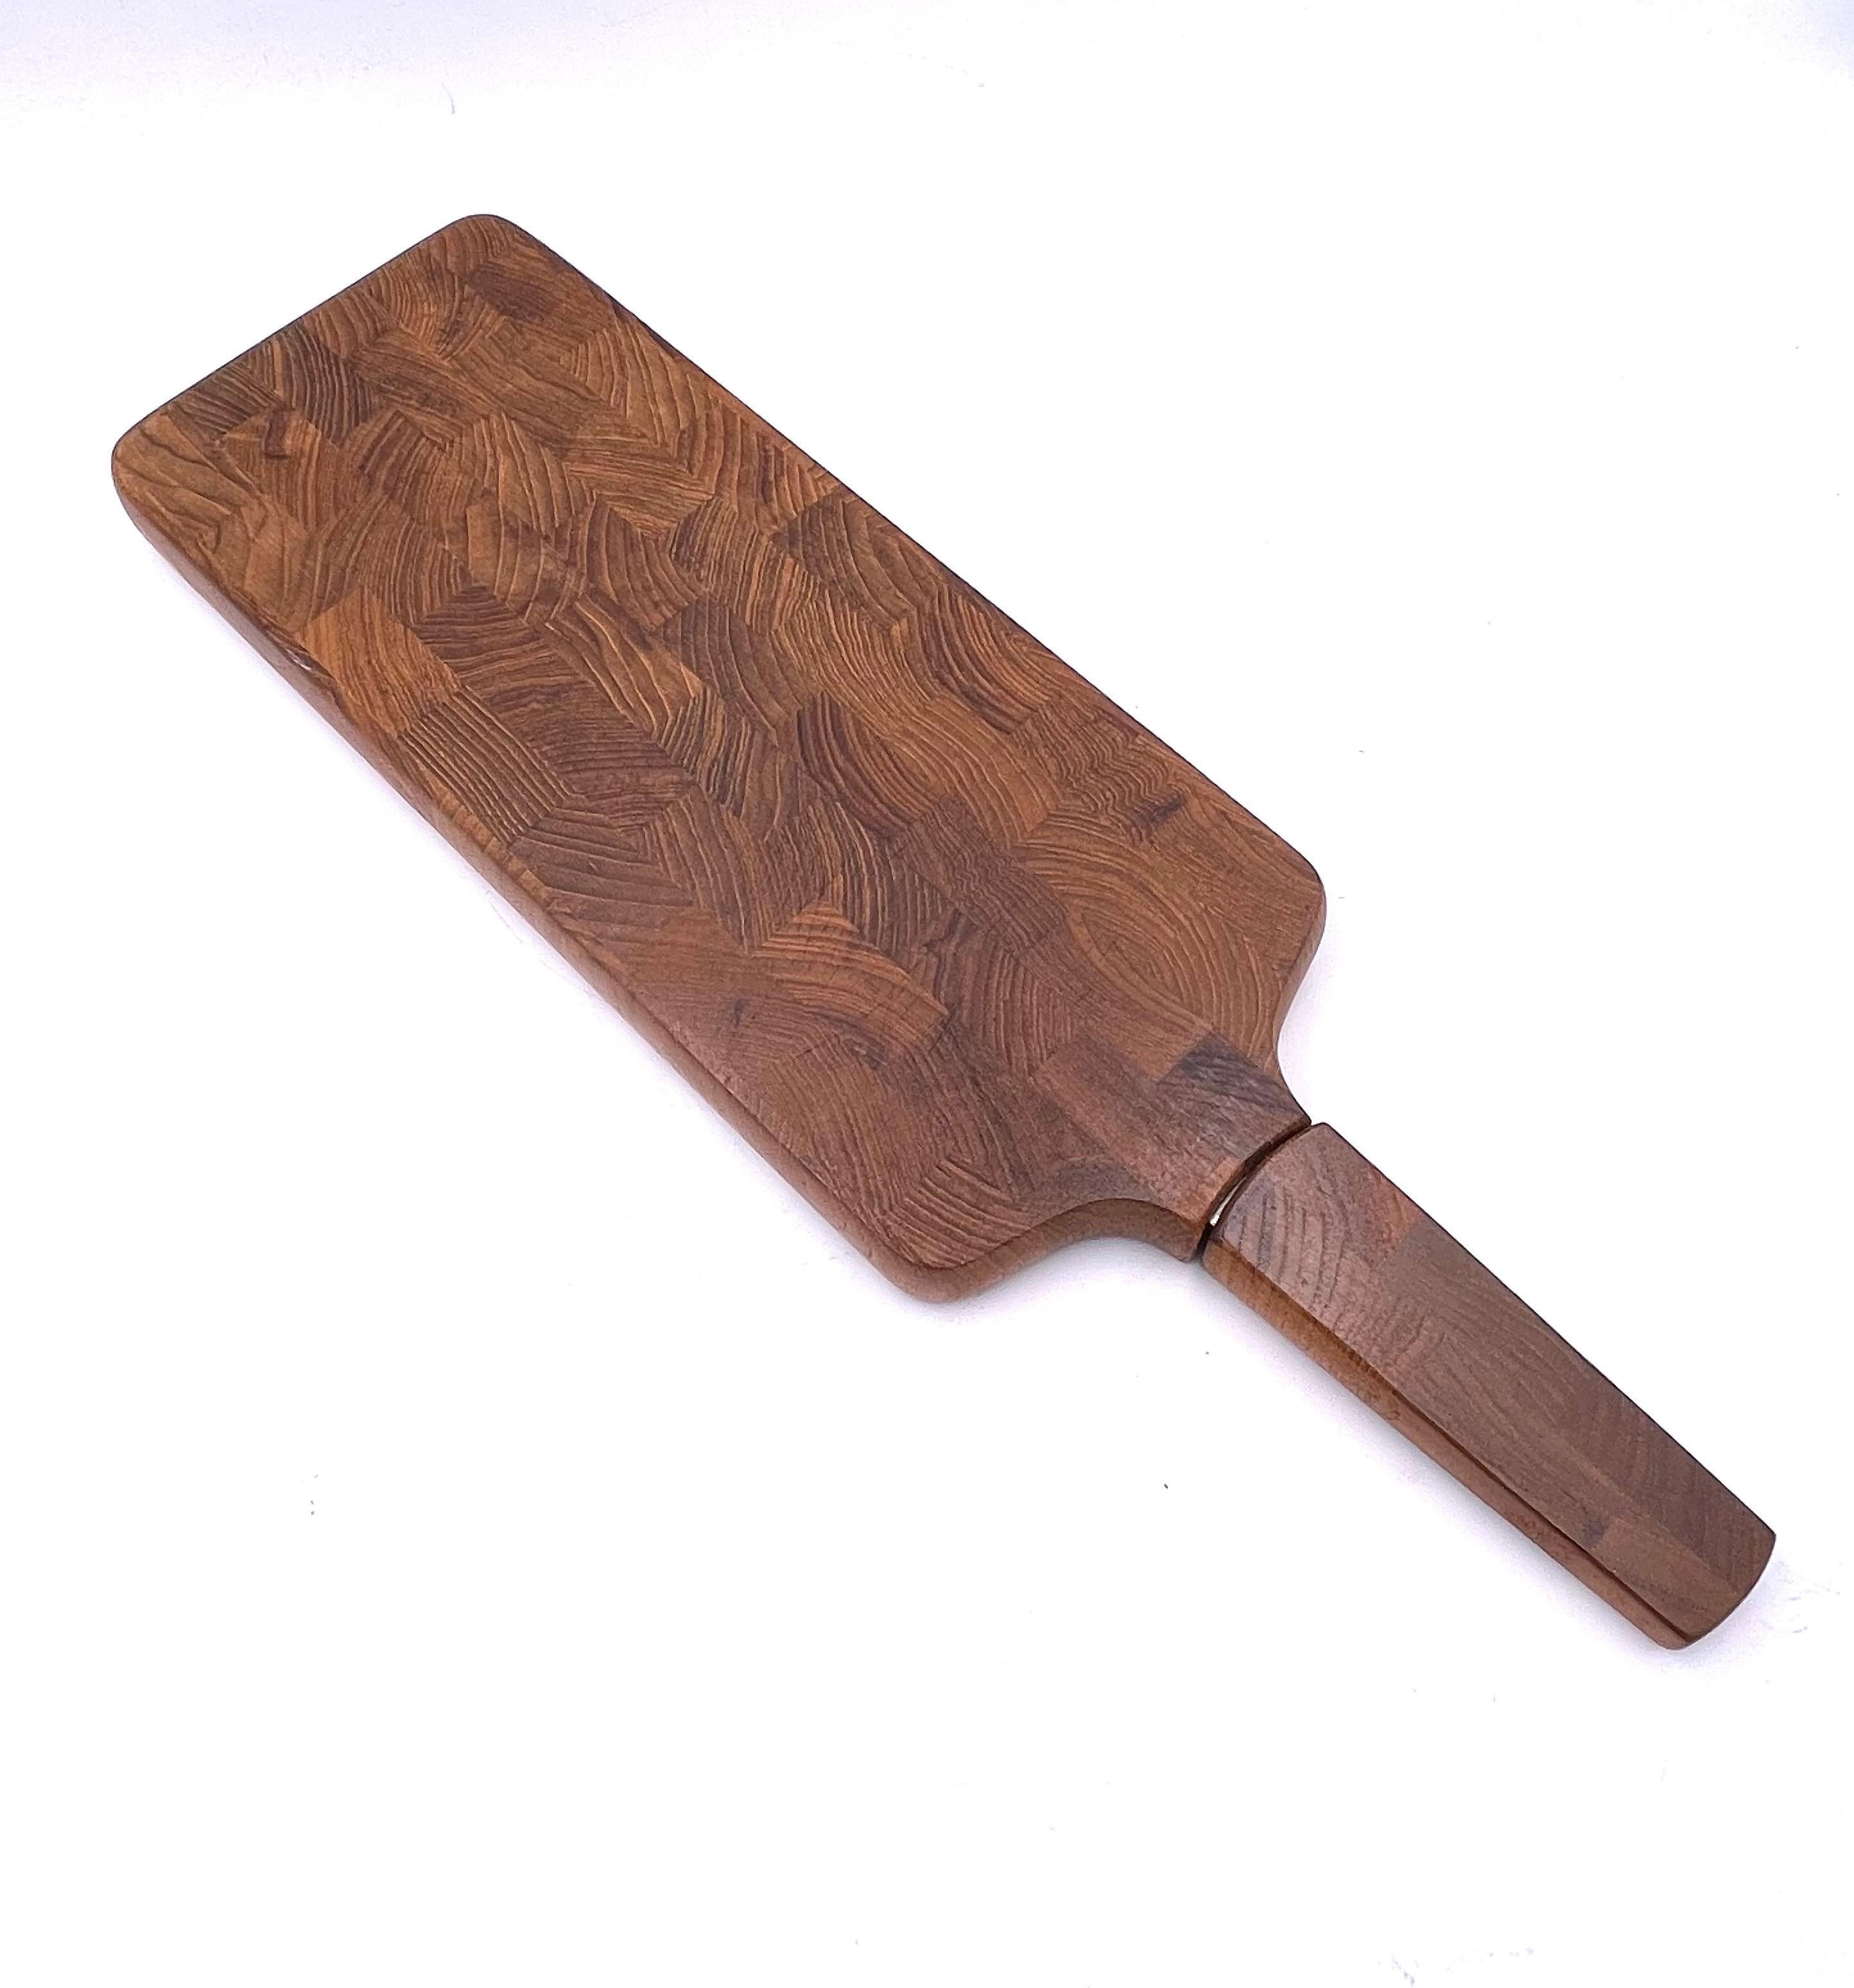 Simple design versatile and practical portable Dansk cheese and crackers butcherblock tray, in solid teak with a knife, circa 1980s. The knife hides inside the tray. Early production.